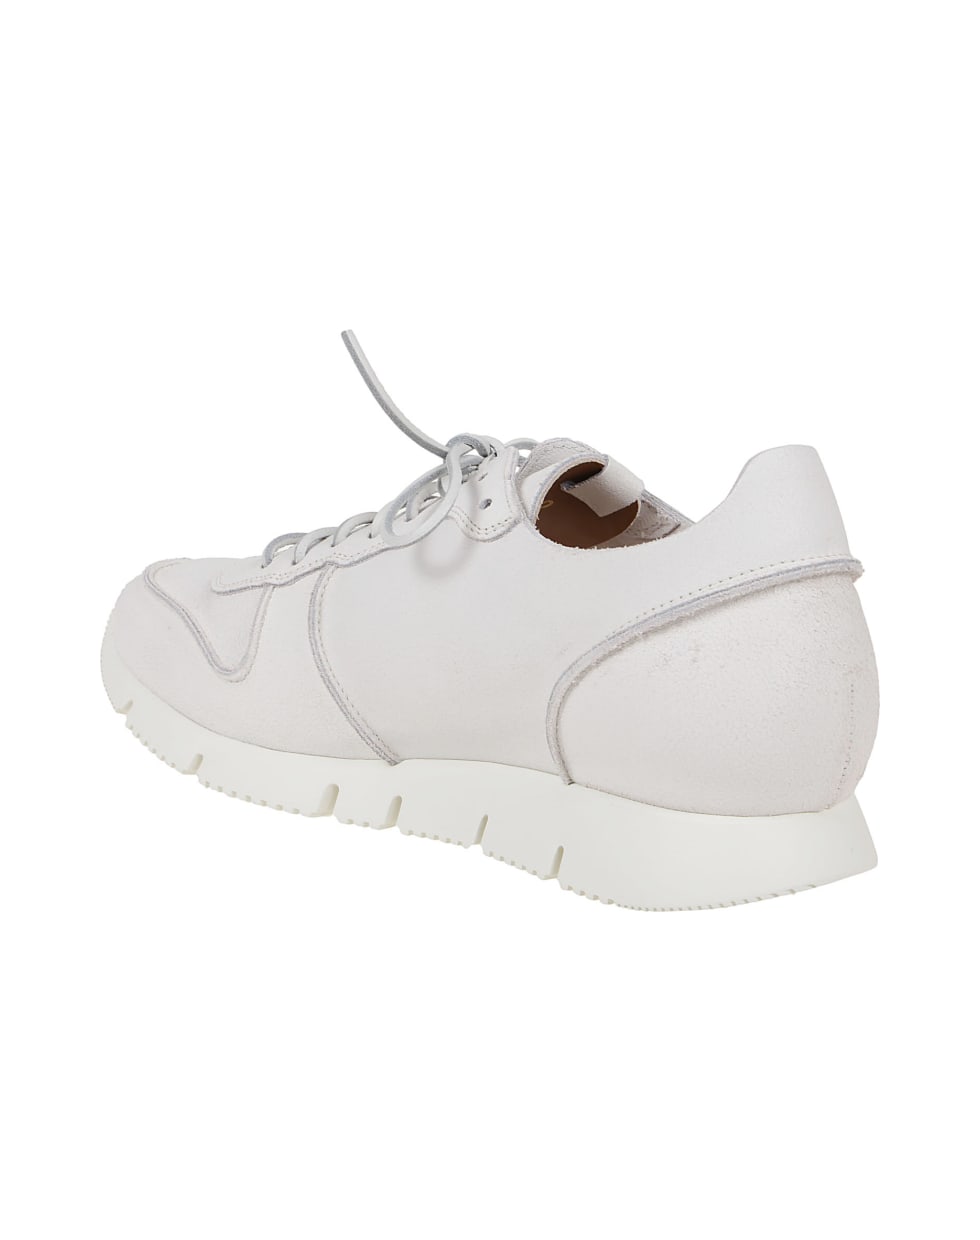 Buttero Leather Shoes - Bianco